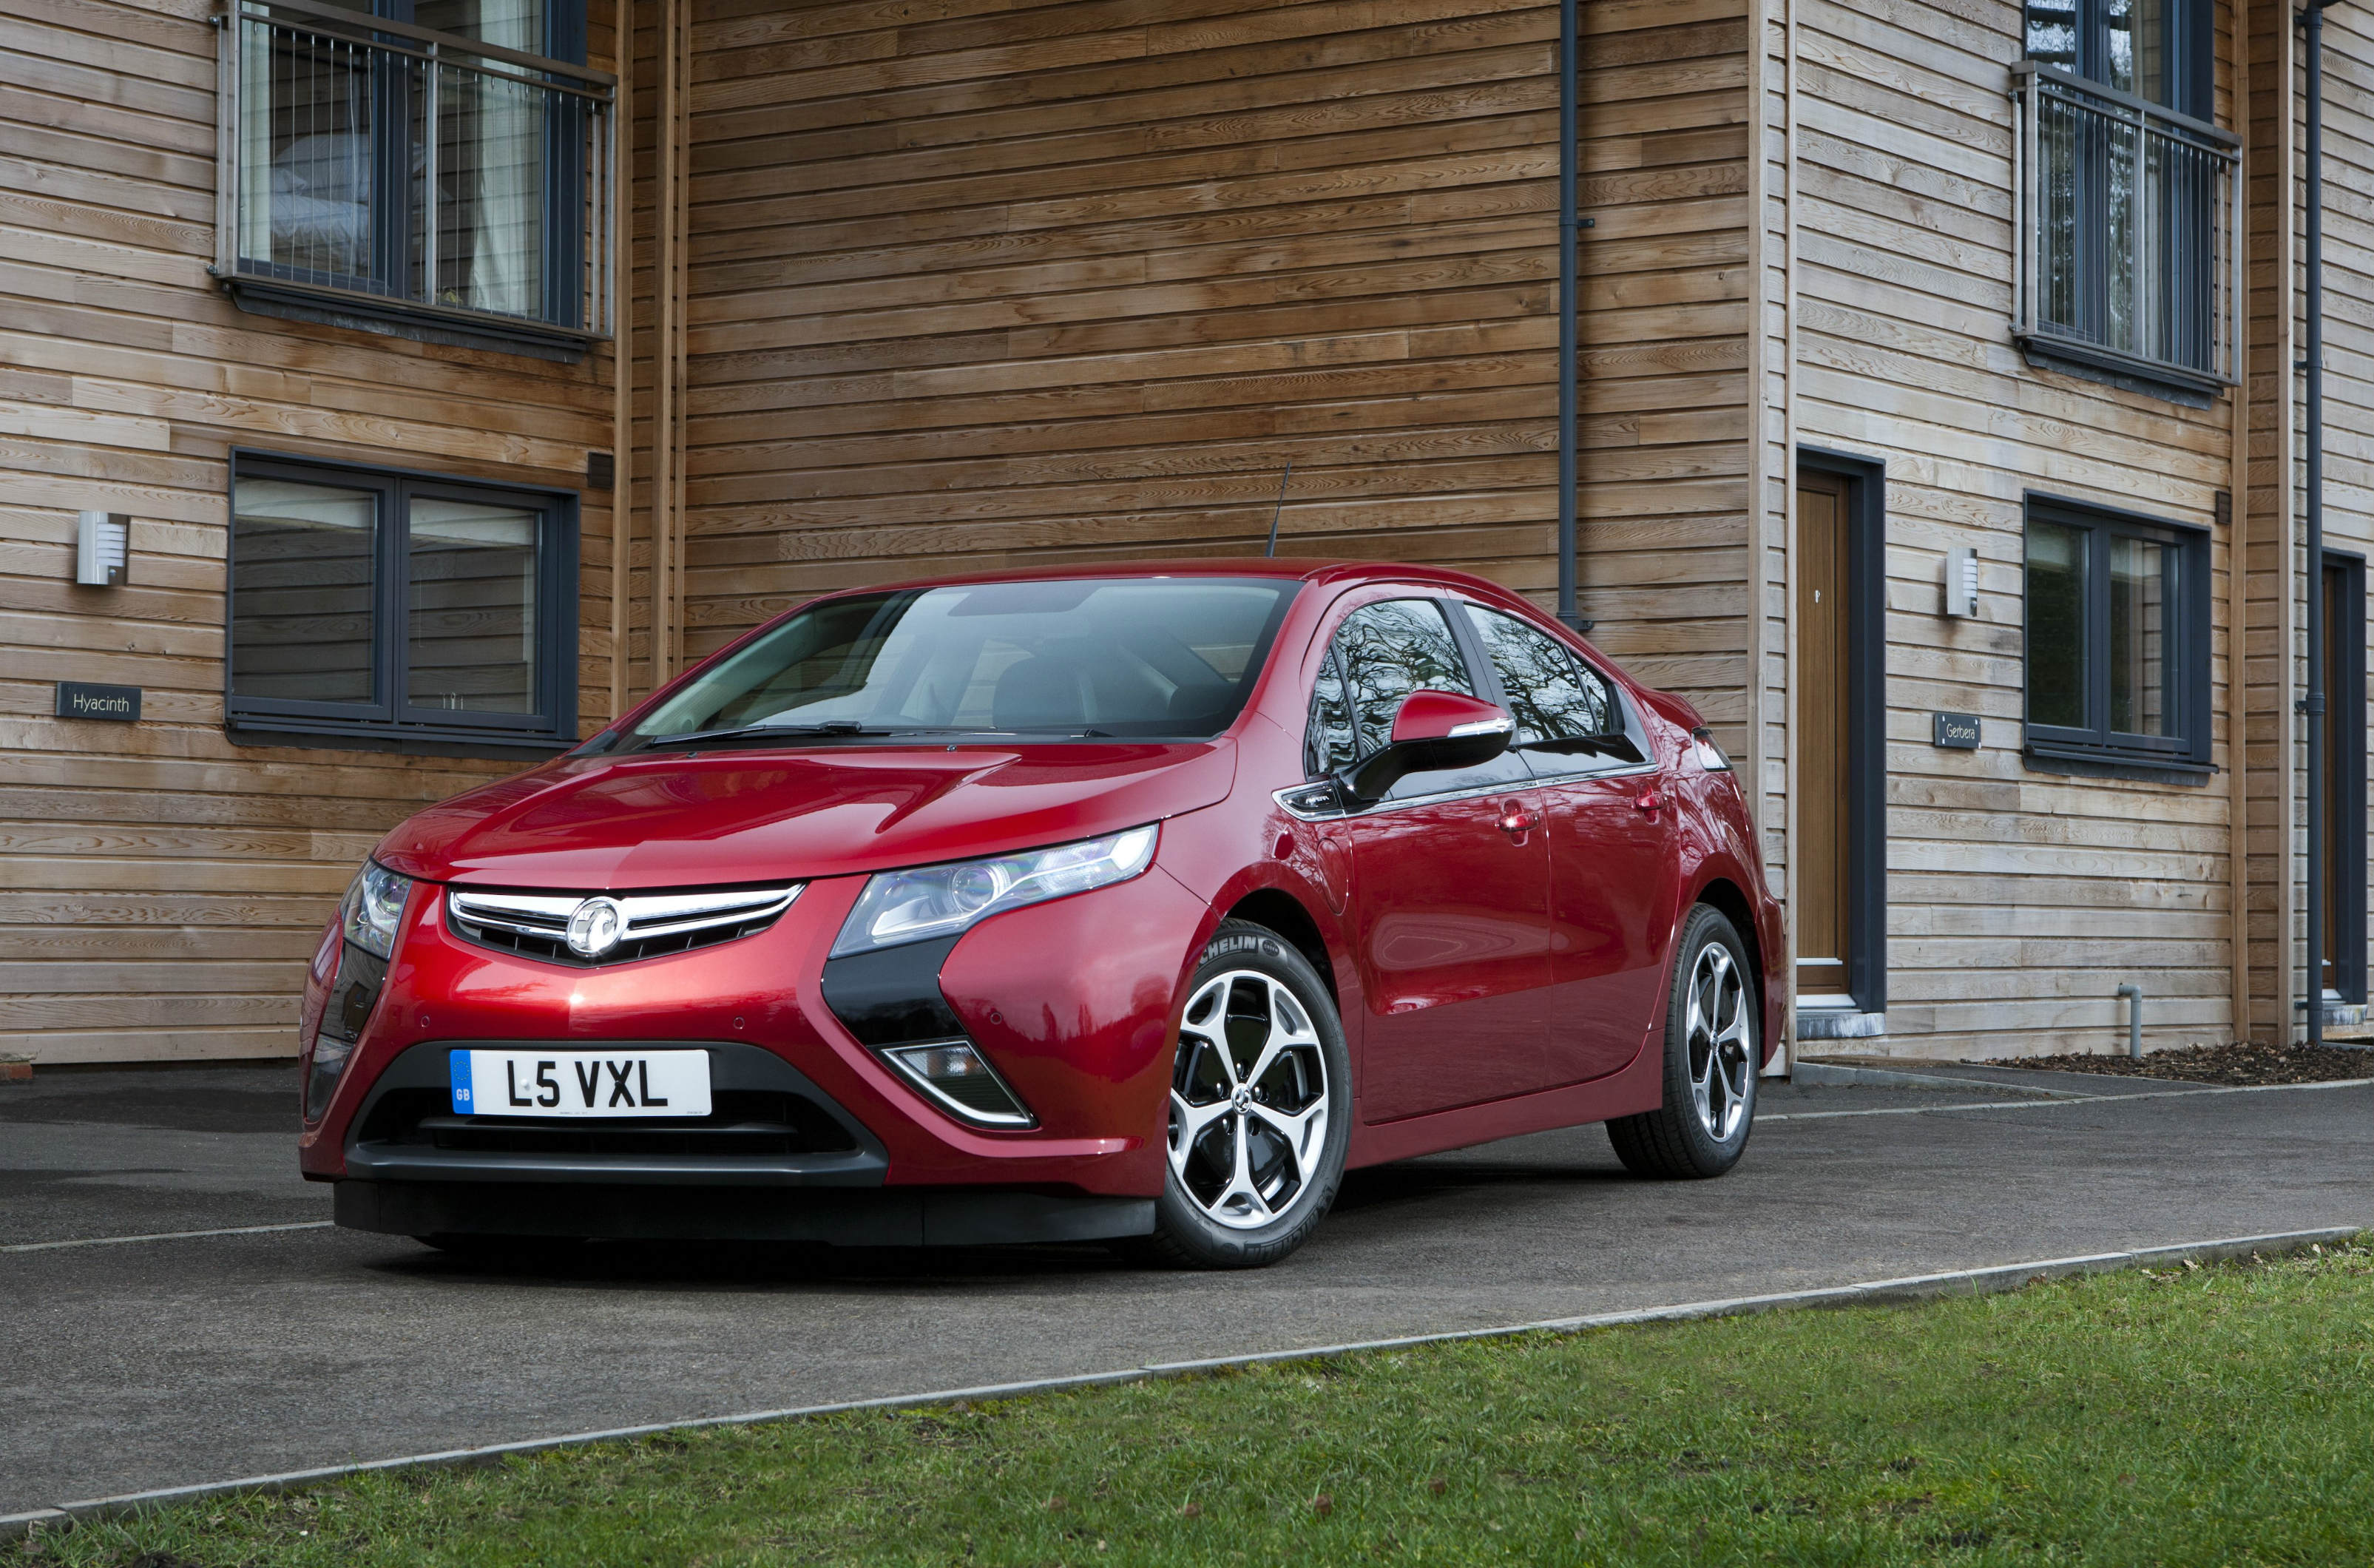 Used car buying guide: super-saver plug-in electric cars, including the Vauxhall Ampera